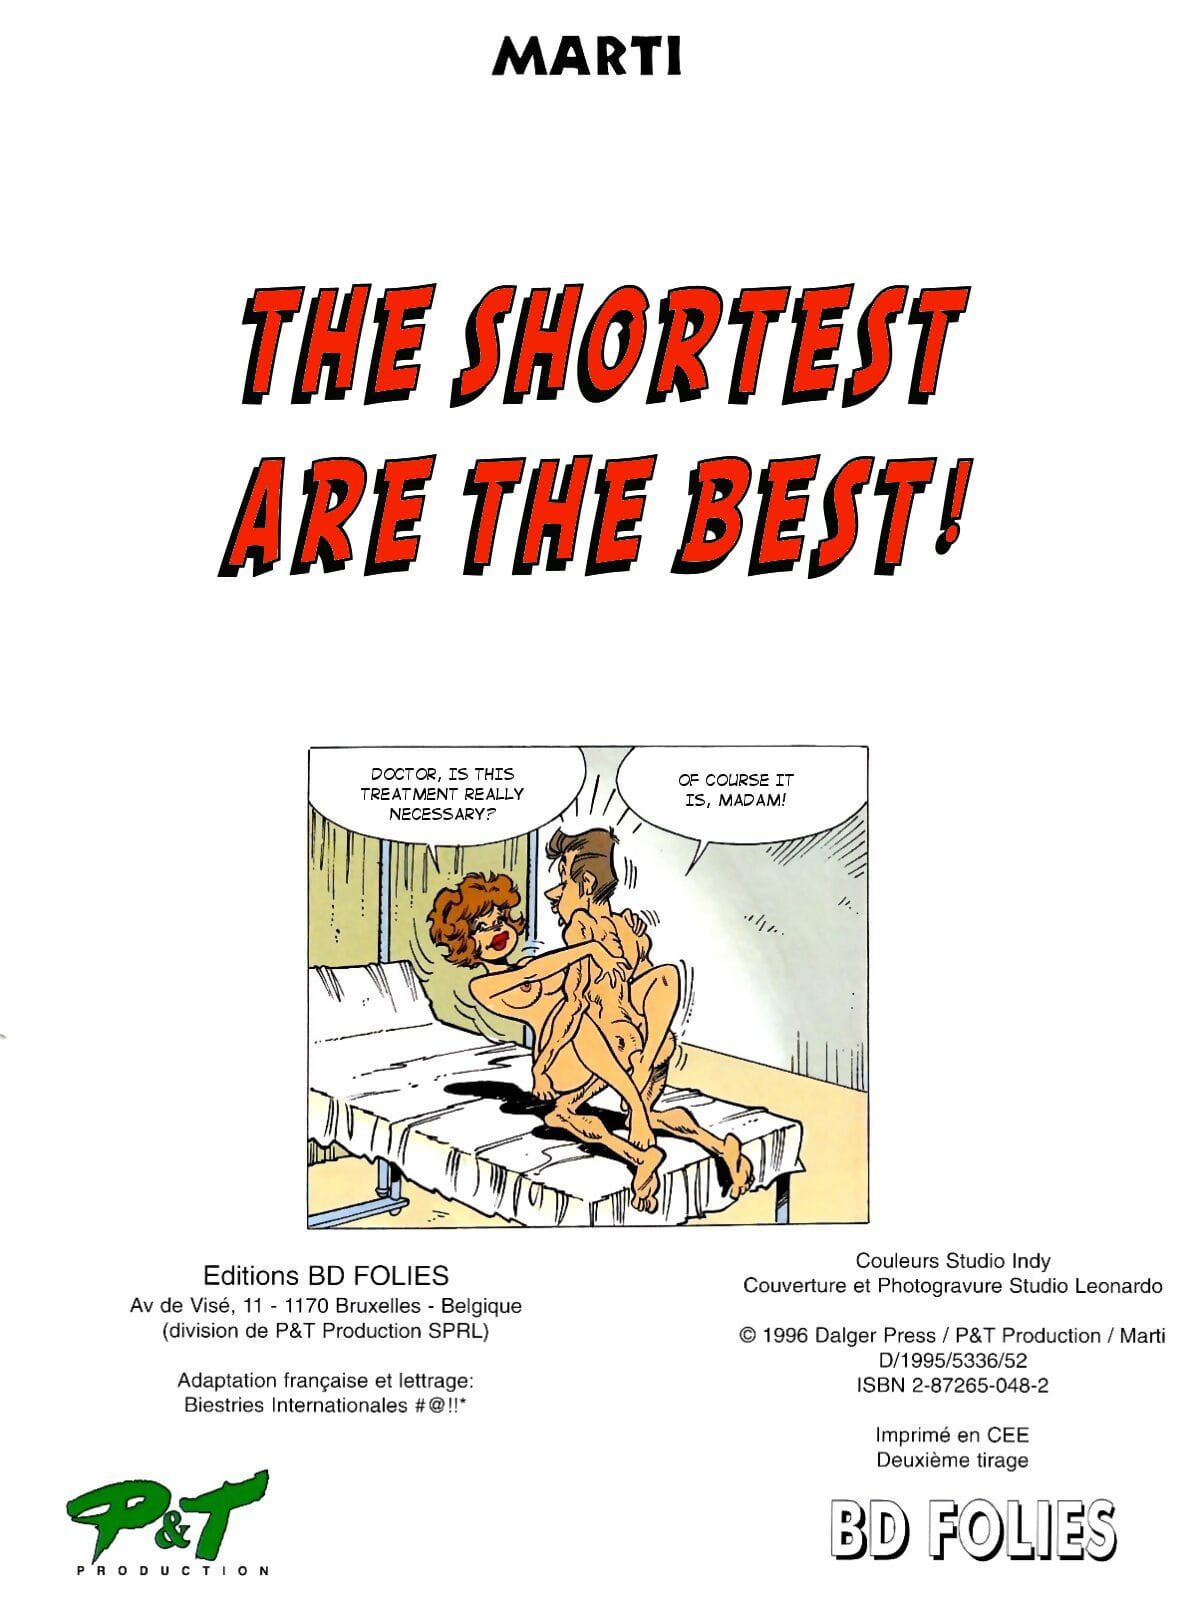 The Shortest are The Best by Marti page 1